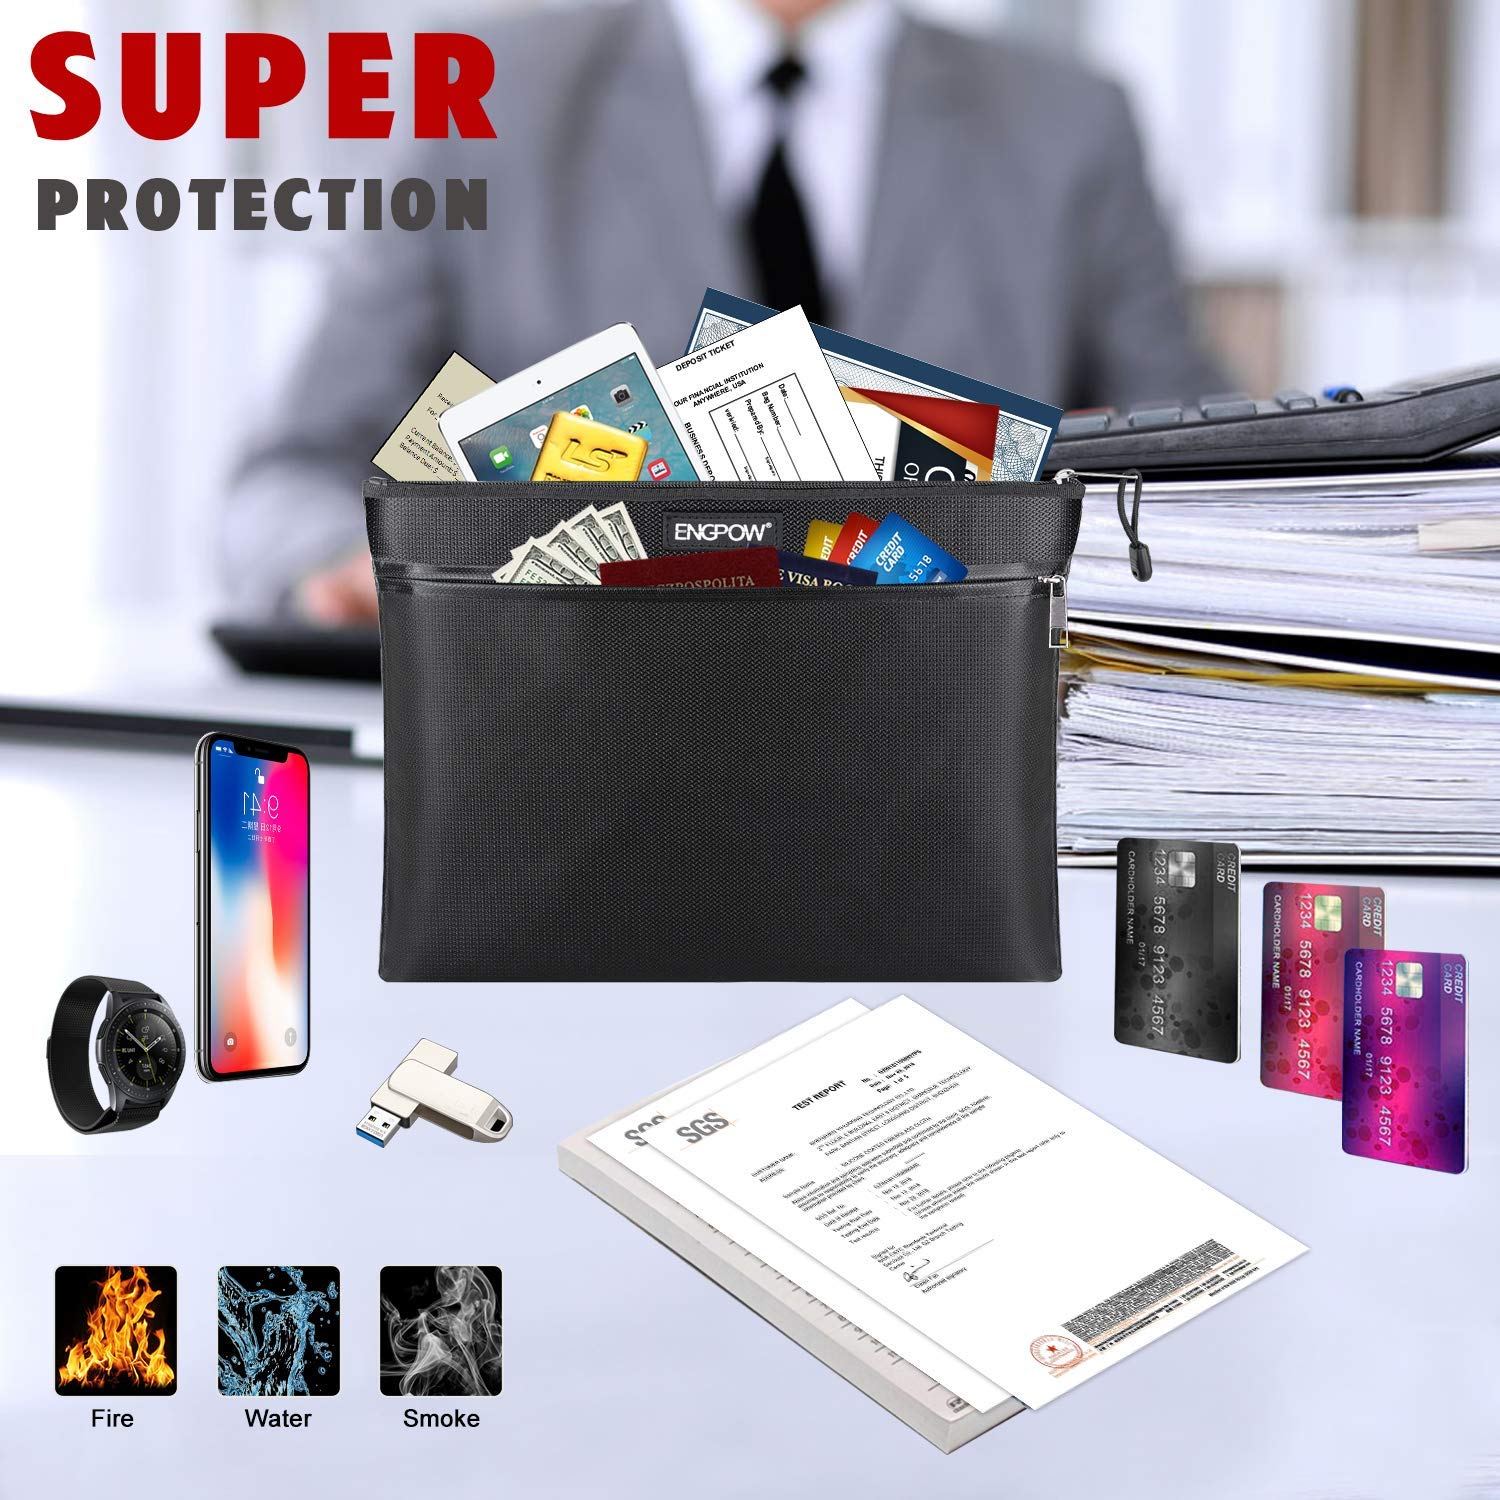 ENGPOW Fireproof Document Bag Two Pockets Two Zippers,Fireproof Safe Bag 13.4"x 10.2" Waterproof and Fireproof Money Bag Money Safe Pouch File Storage for A4 Document Holder,Cash and Tablet